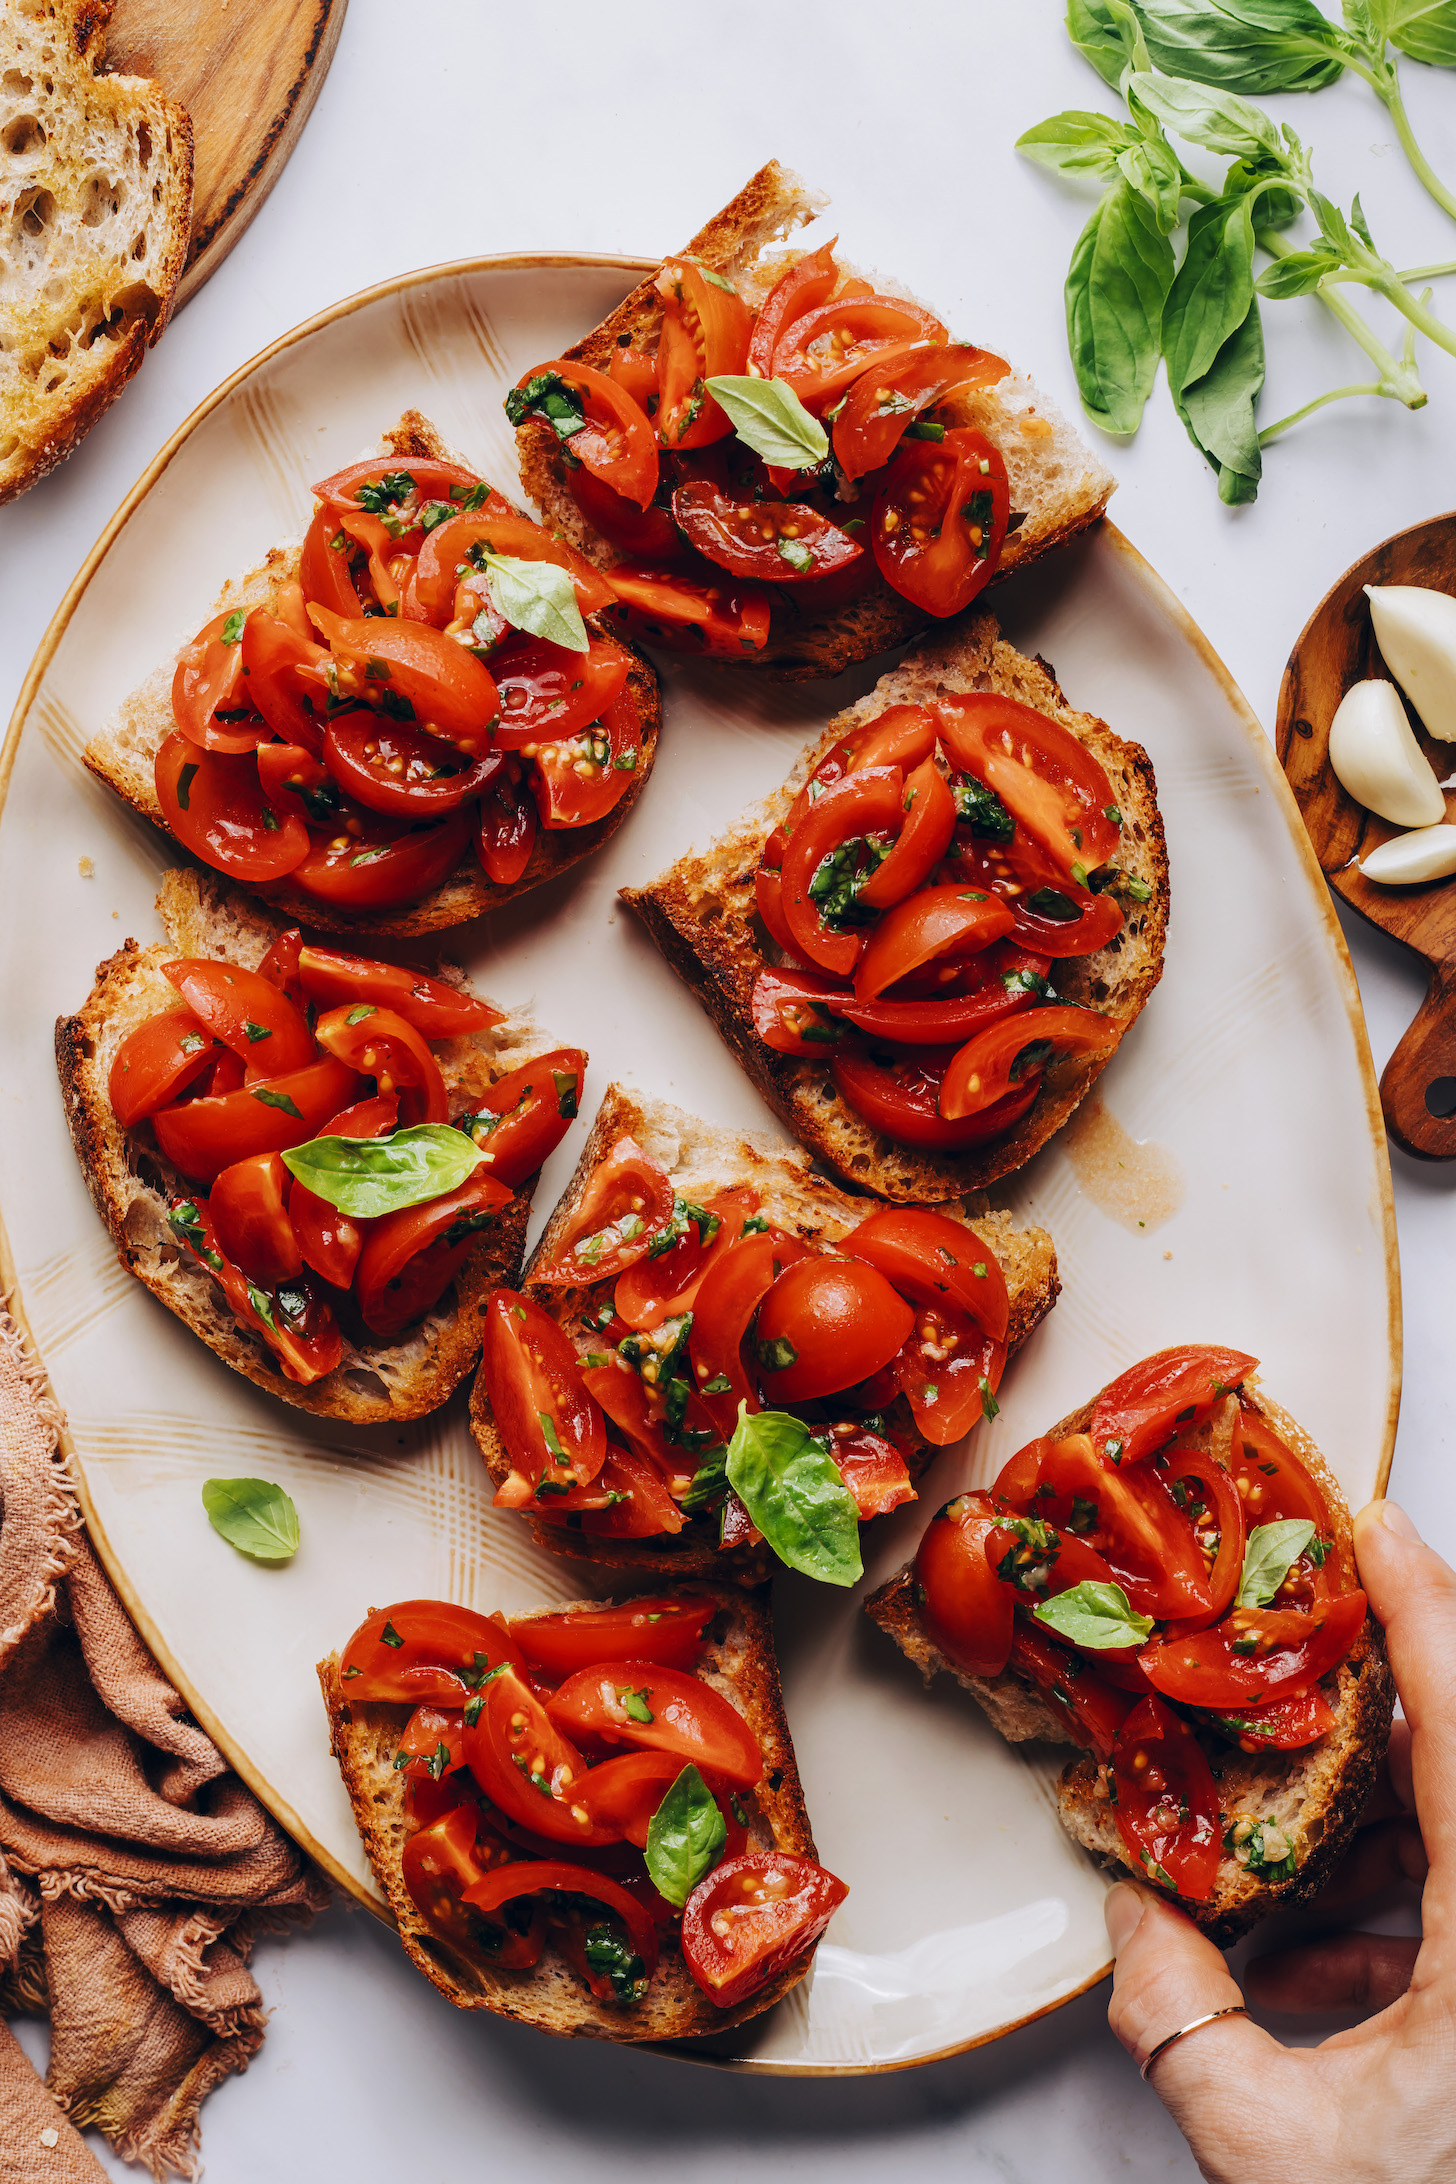 Picking up a slice of cherry tomato basil bruschetta from a plate